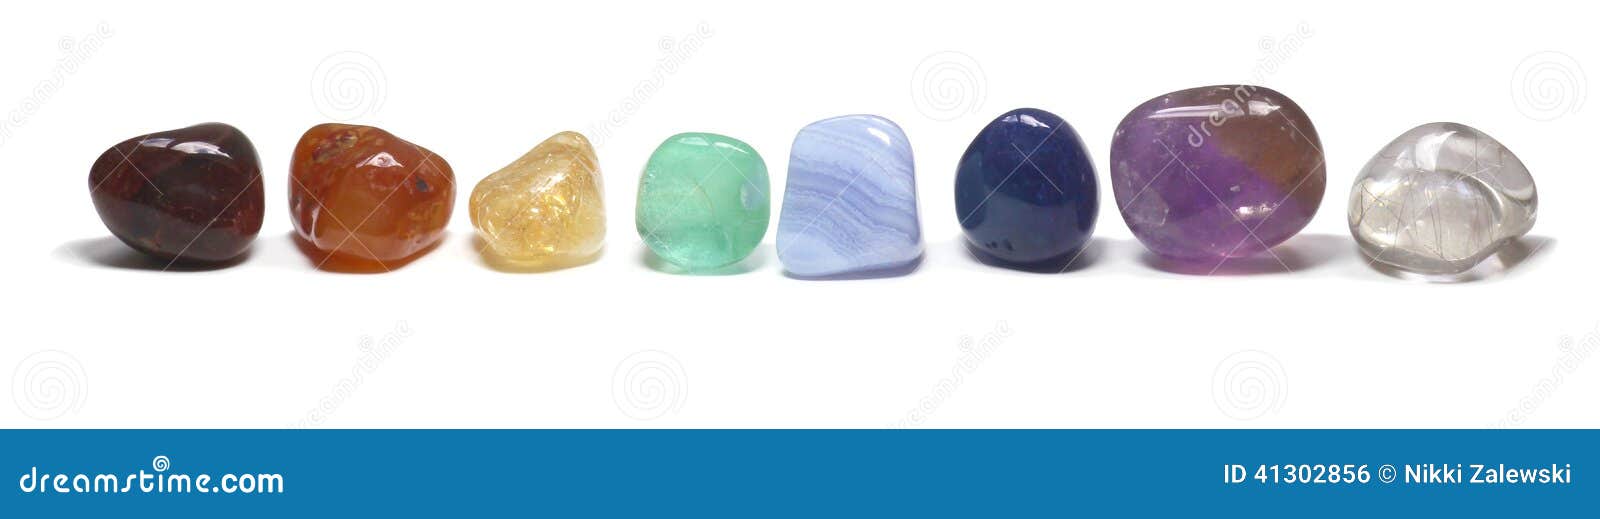 row of chakra crystals on white